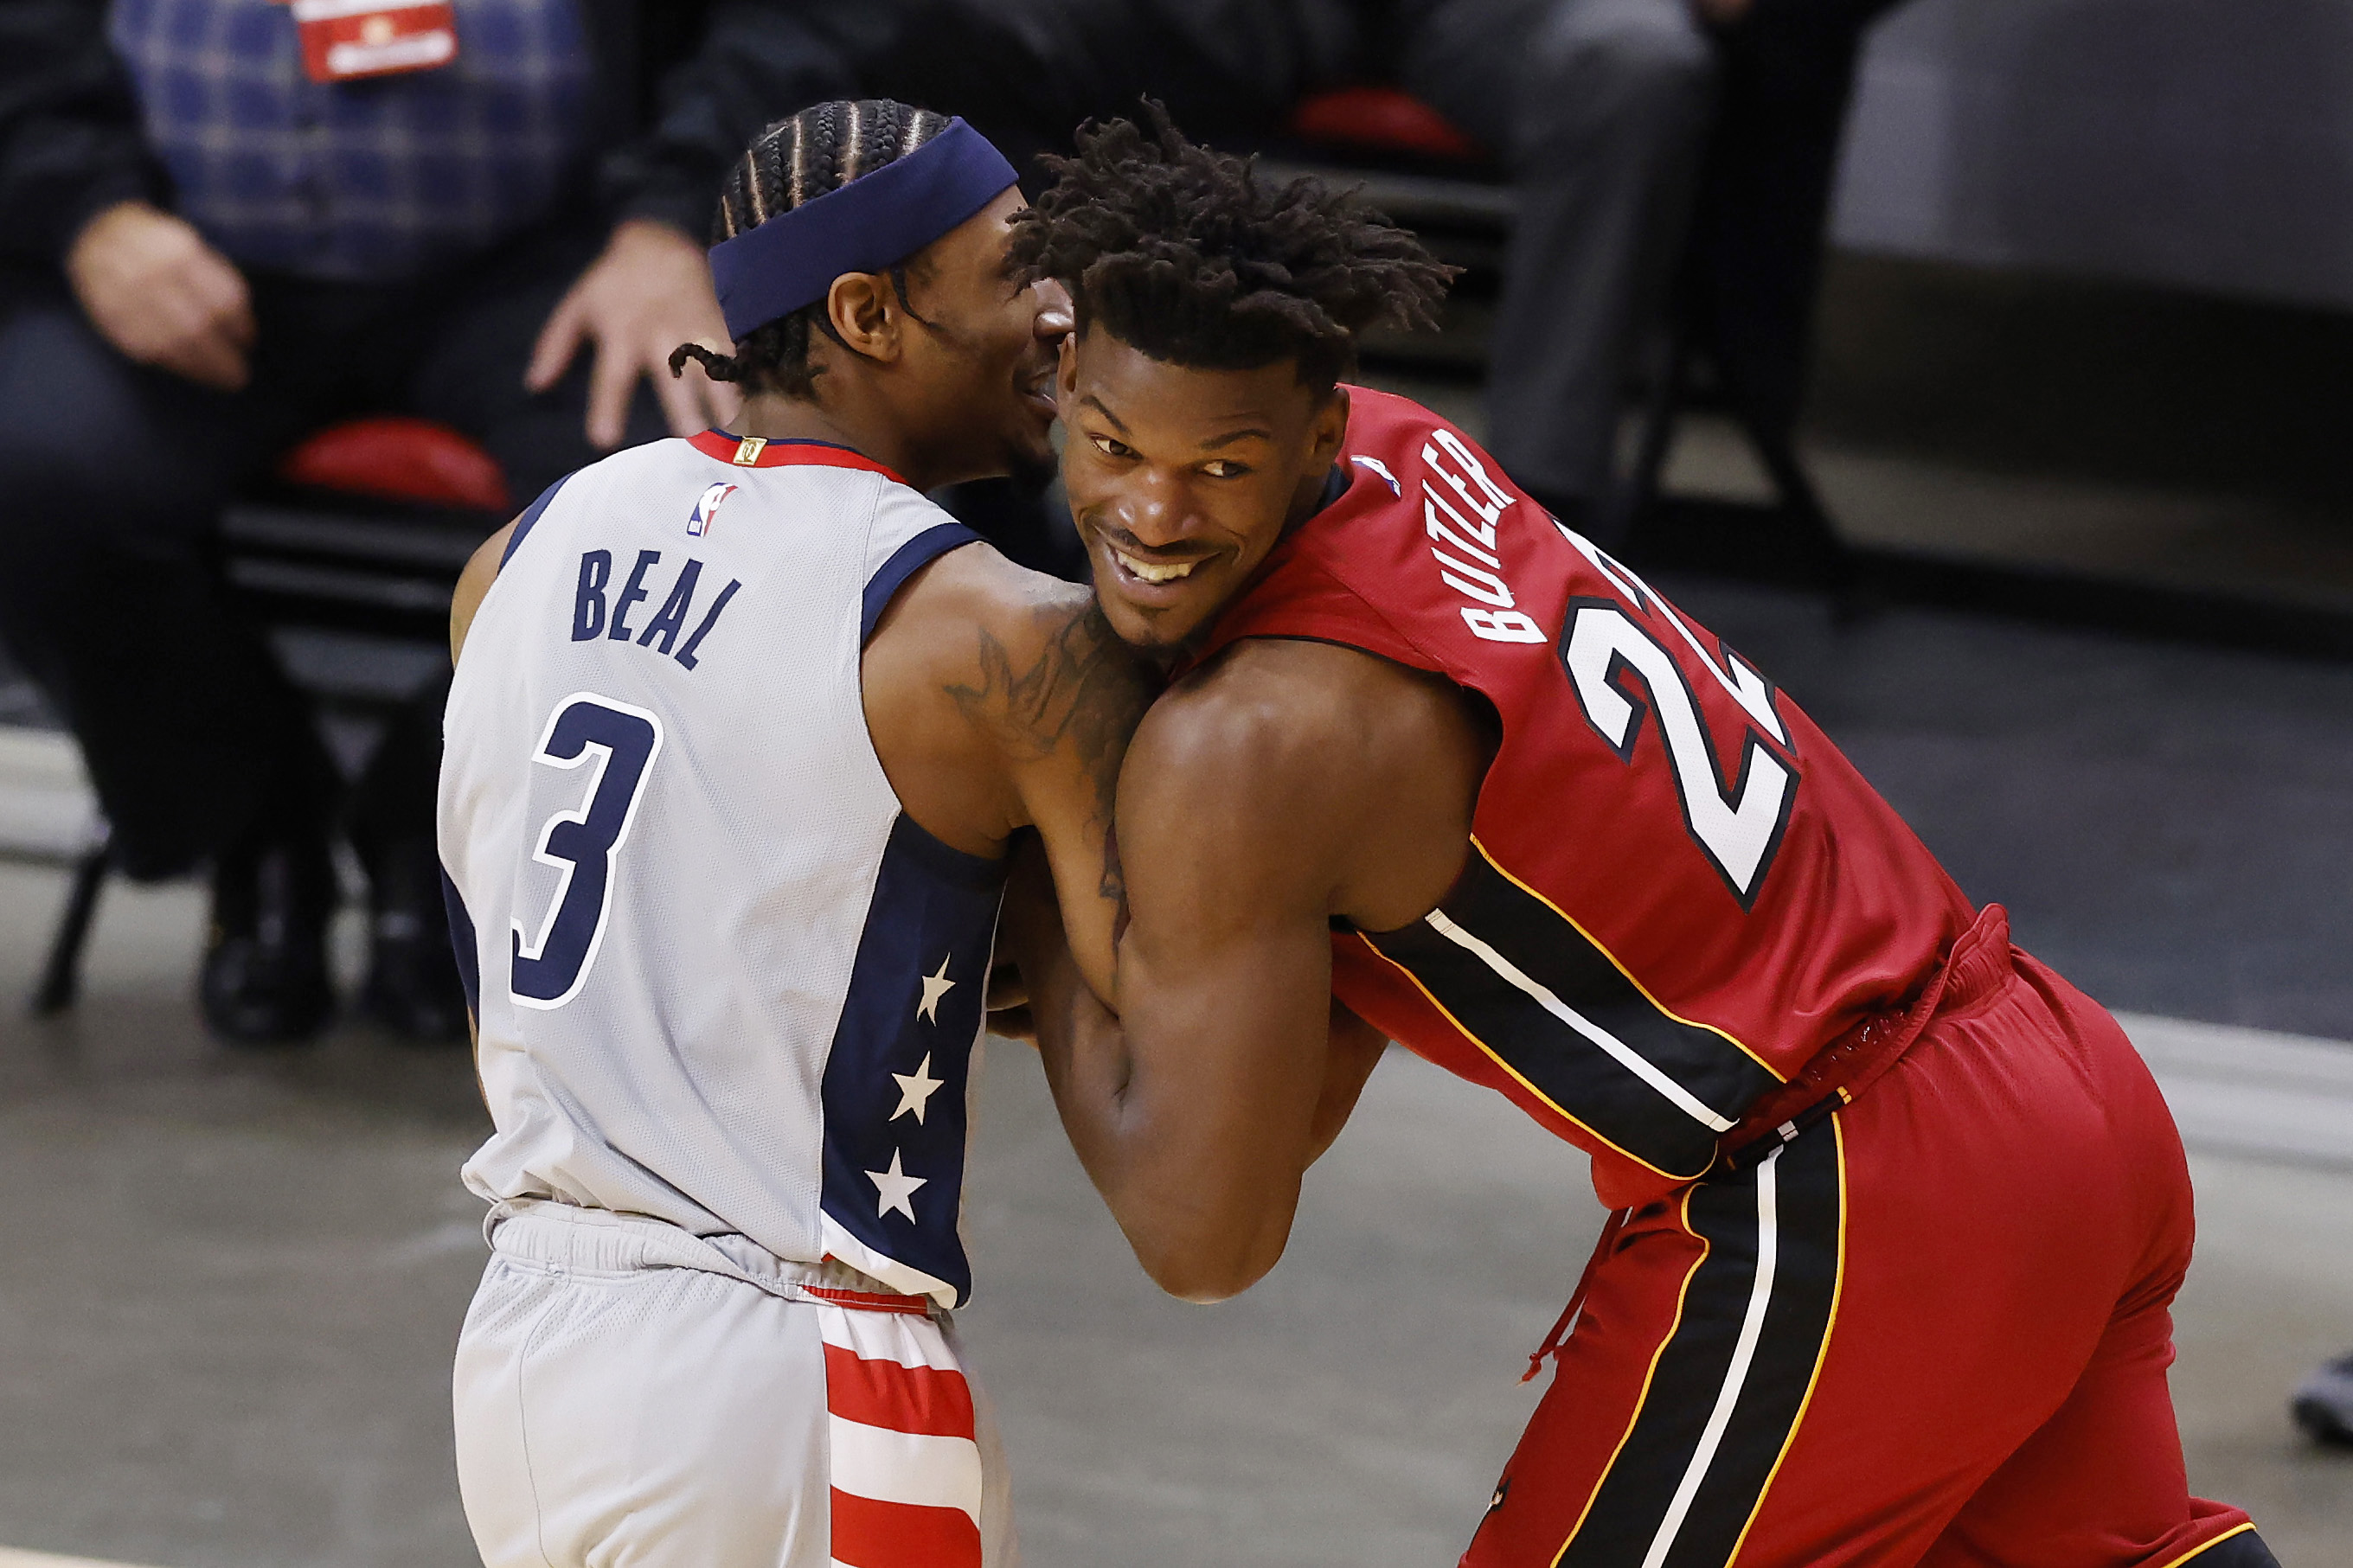 Bradley Beal of the Washington Wizards and Jimmy Butler of the Miami Heat battle for the ball